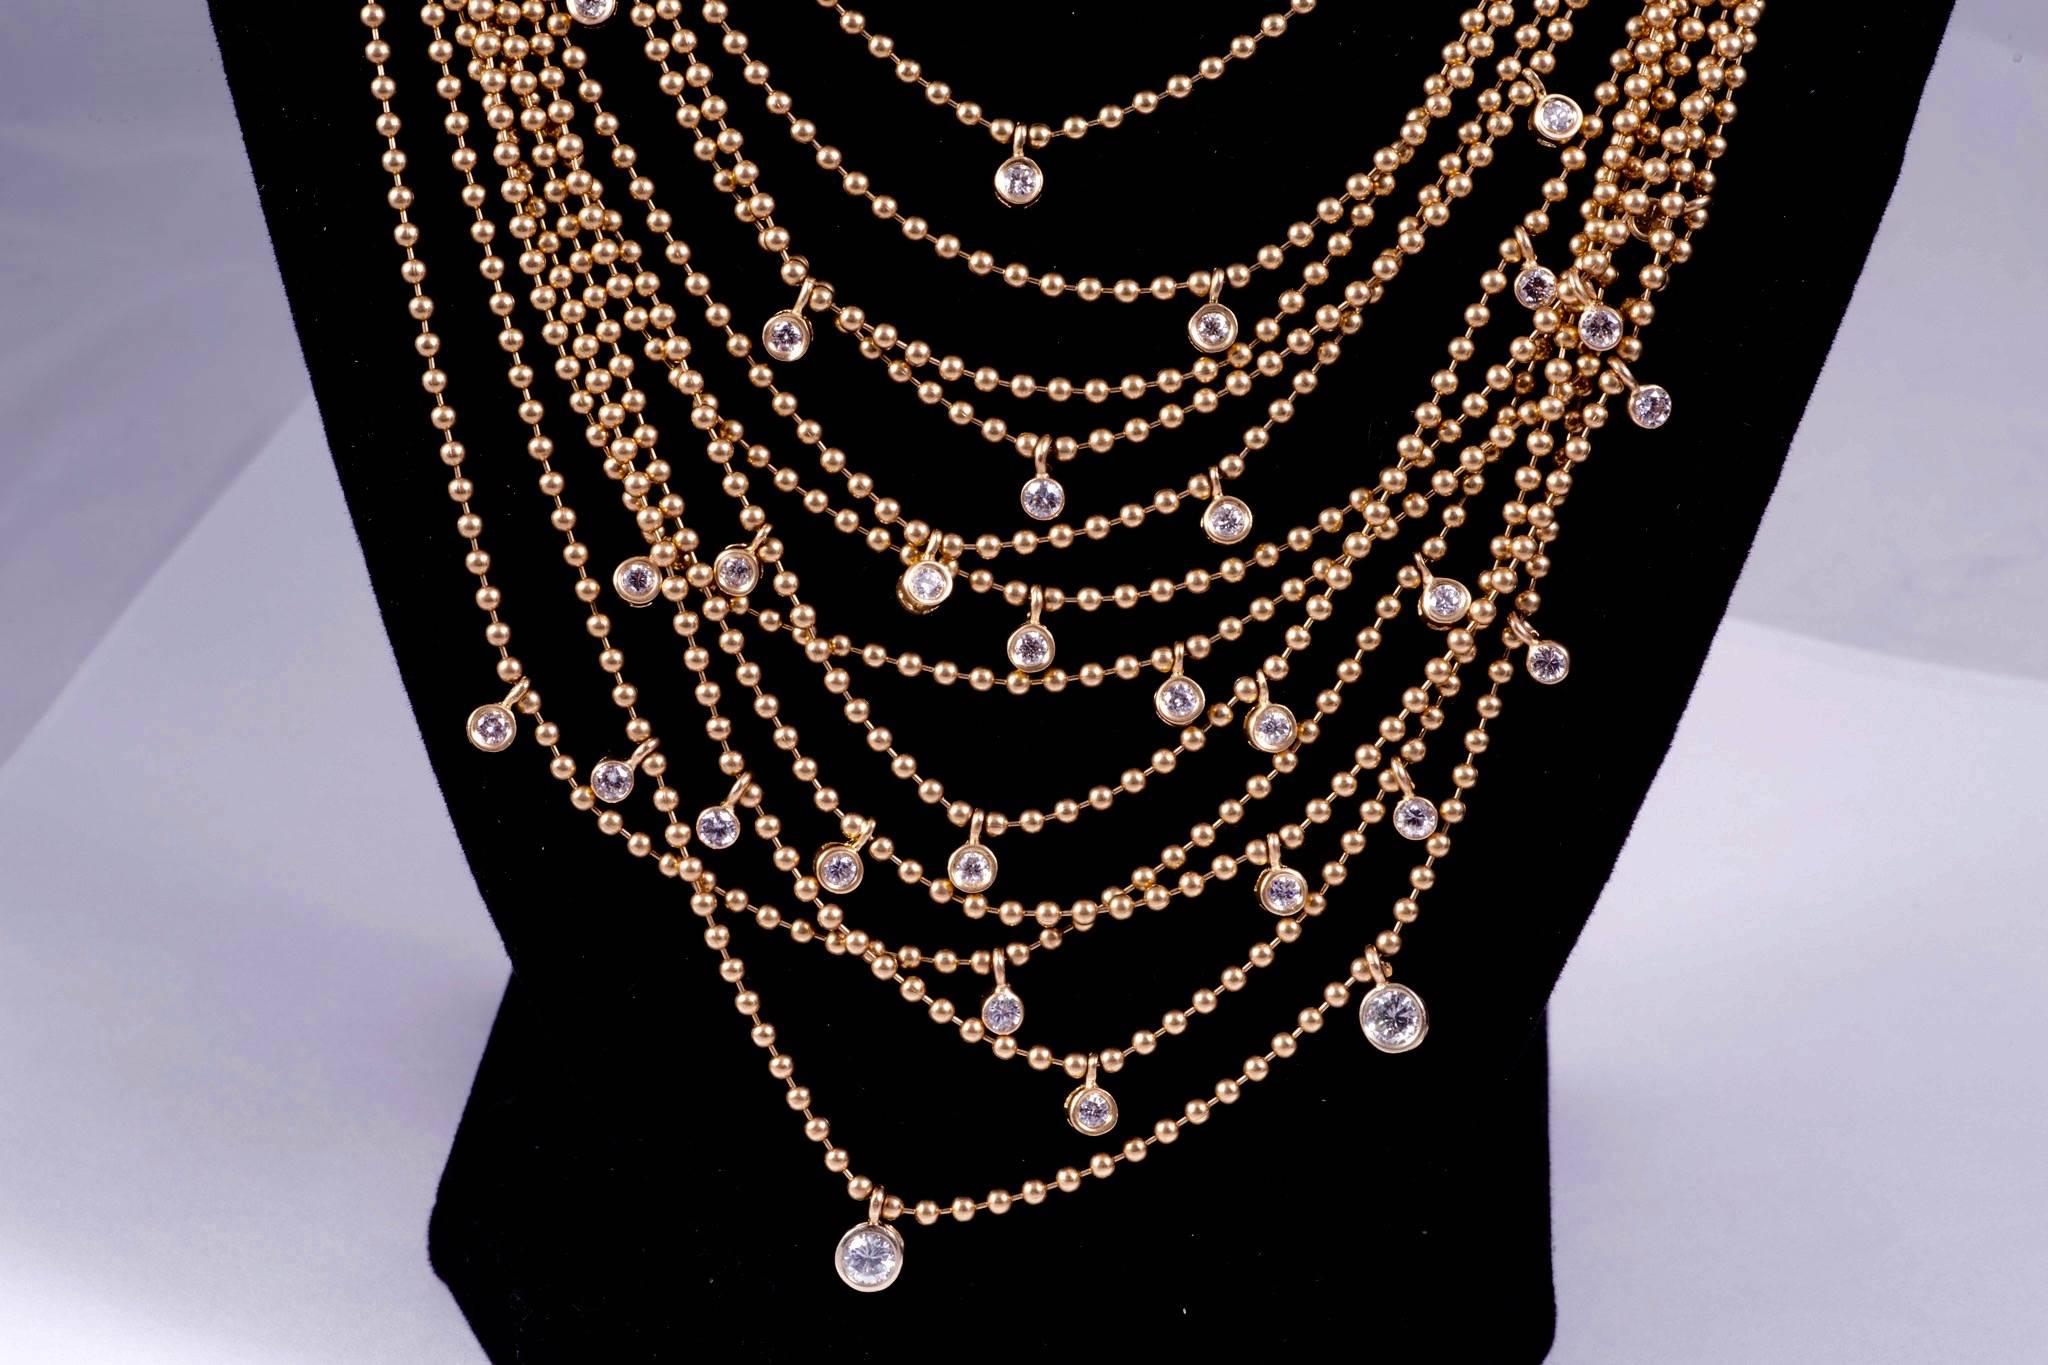 Gorgeous gold necklace of draping gold and diamonds. The necklace has 12 chains, the graduate from 15 1/2